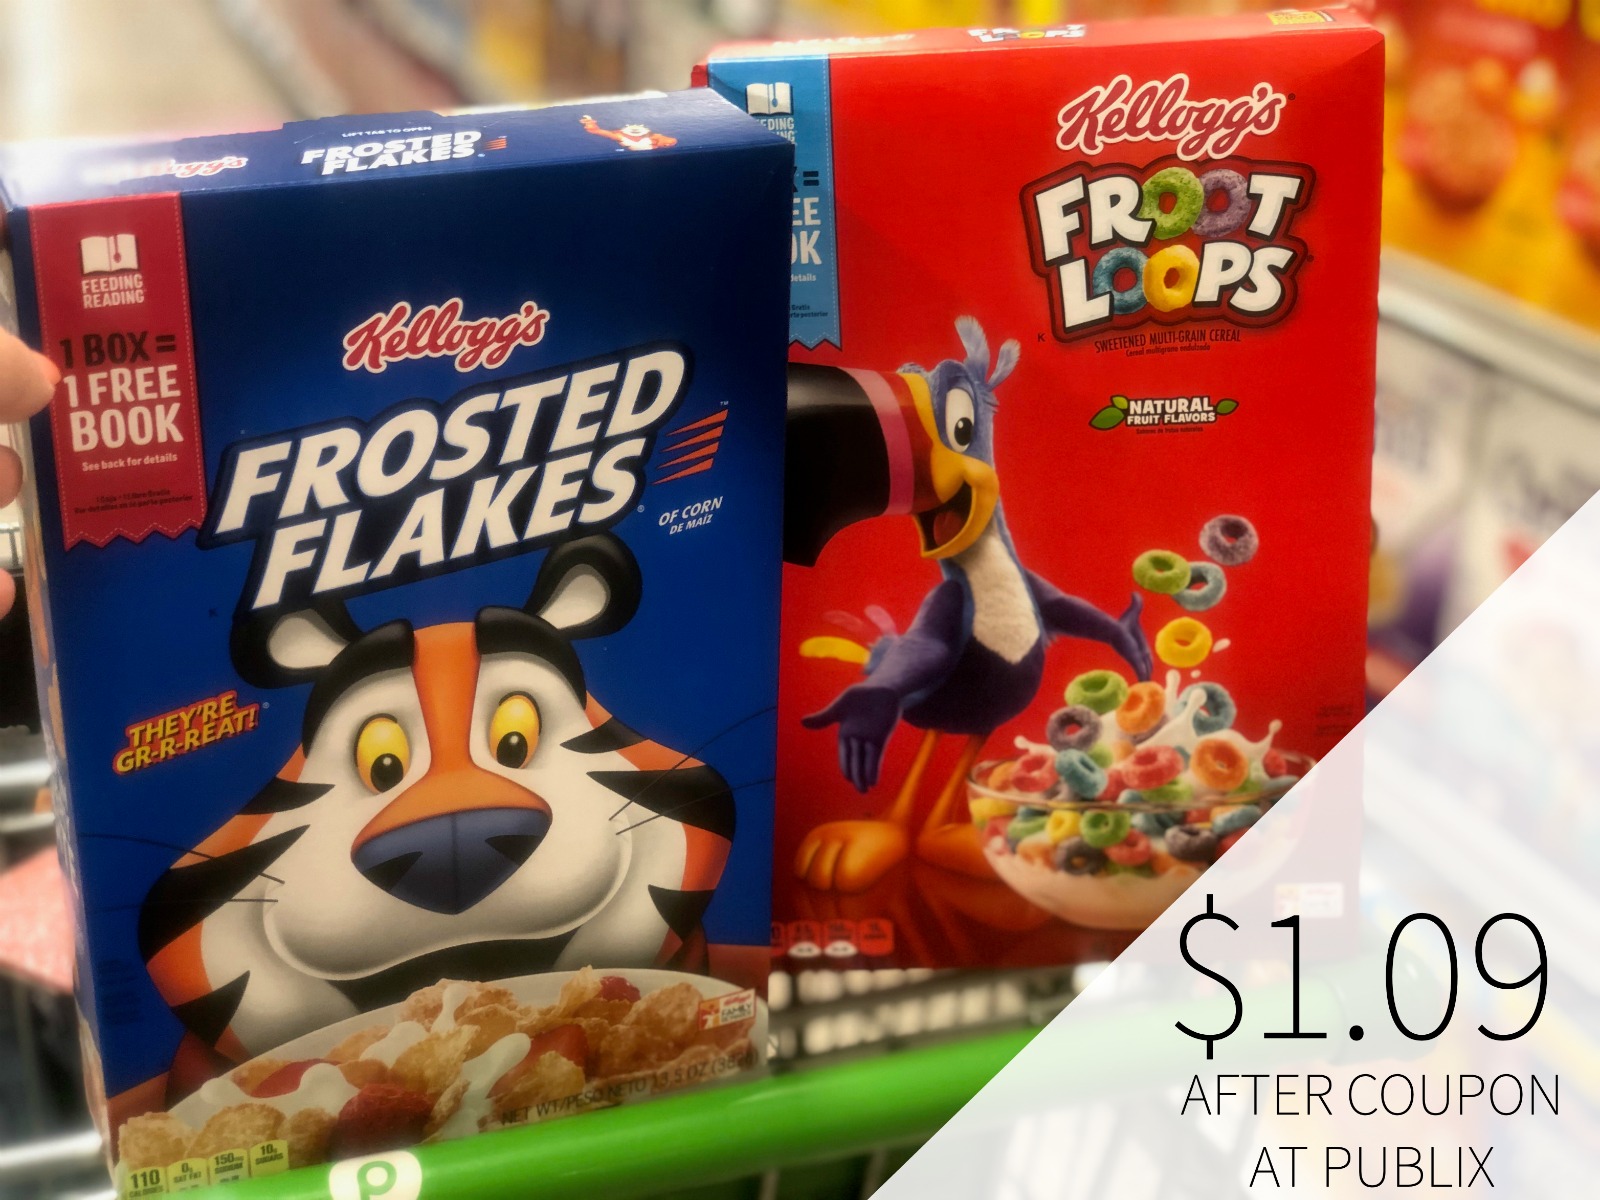 Go Back To School With Kellogg's & Save - Frosted Flakes And Froot Loops Are BOGO At Publix on I Heart Publix 1